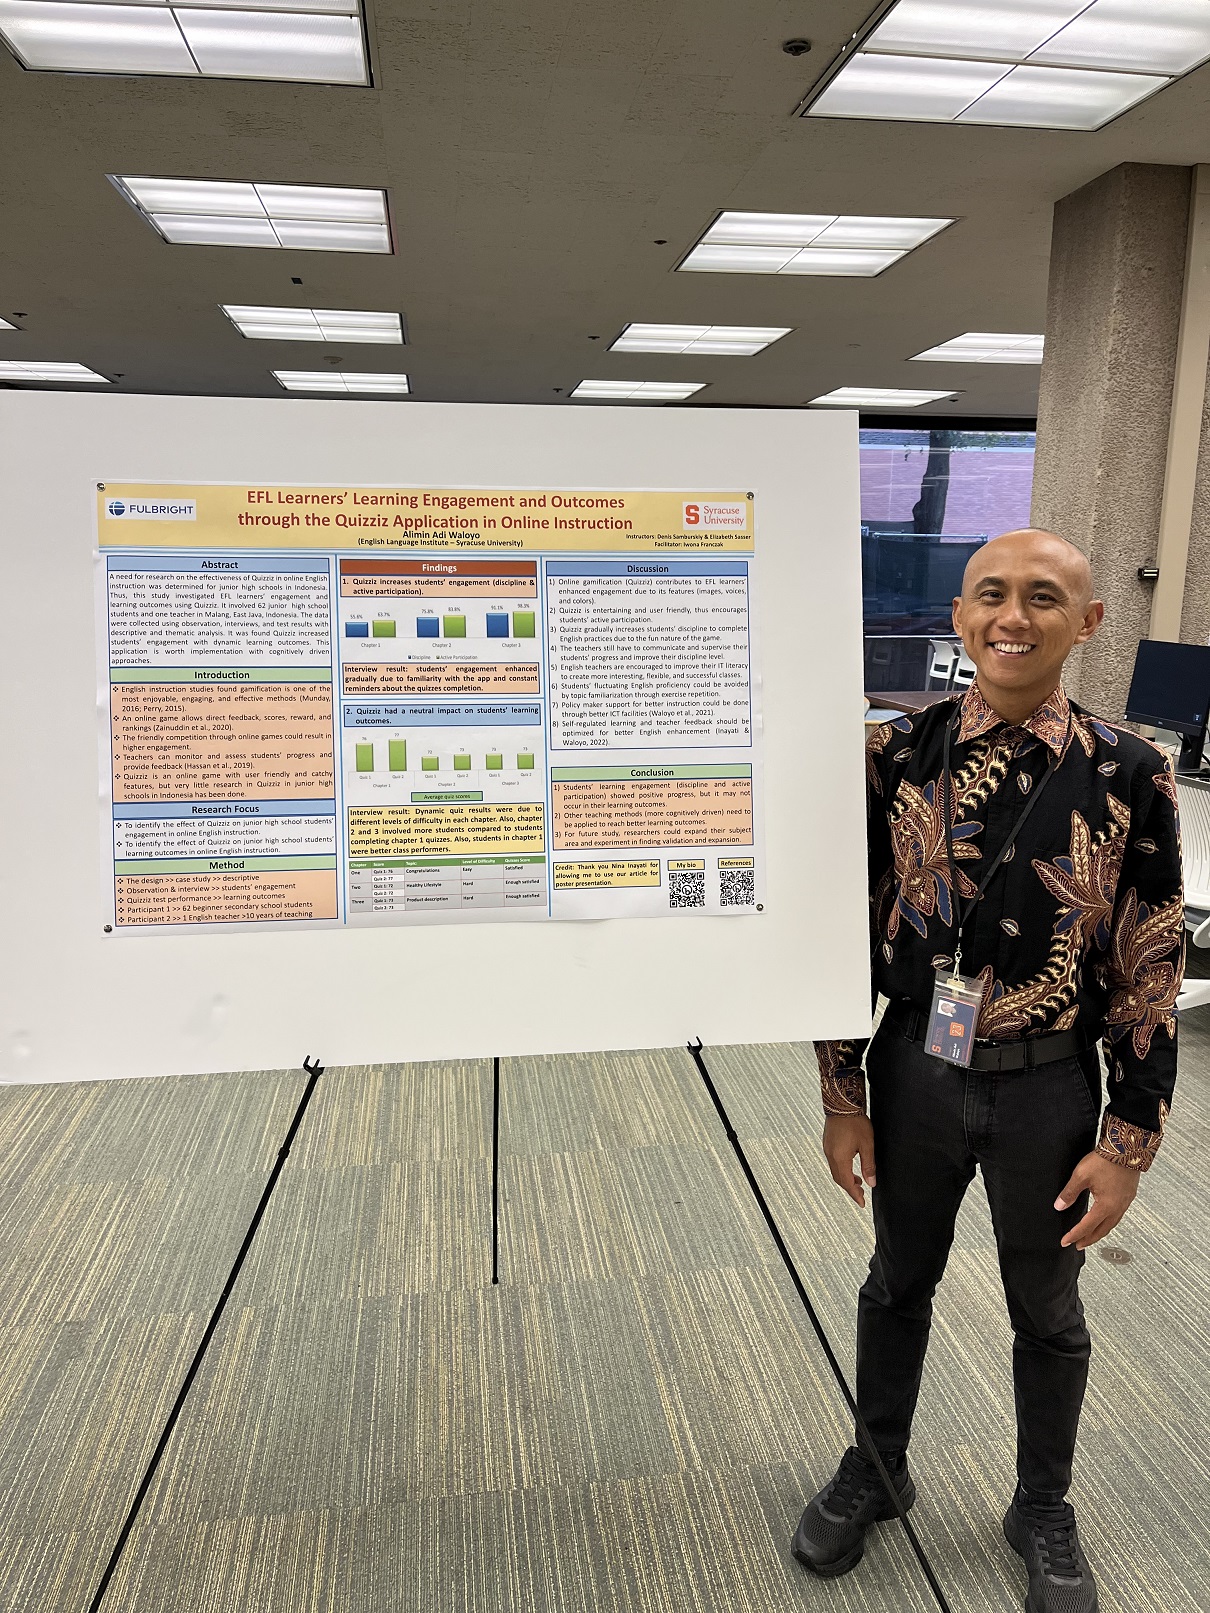 person standing next to research poster